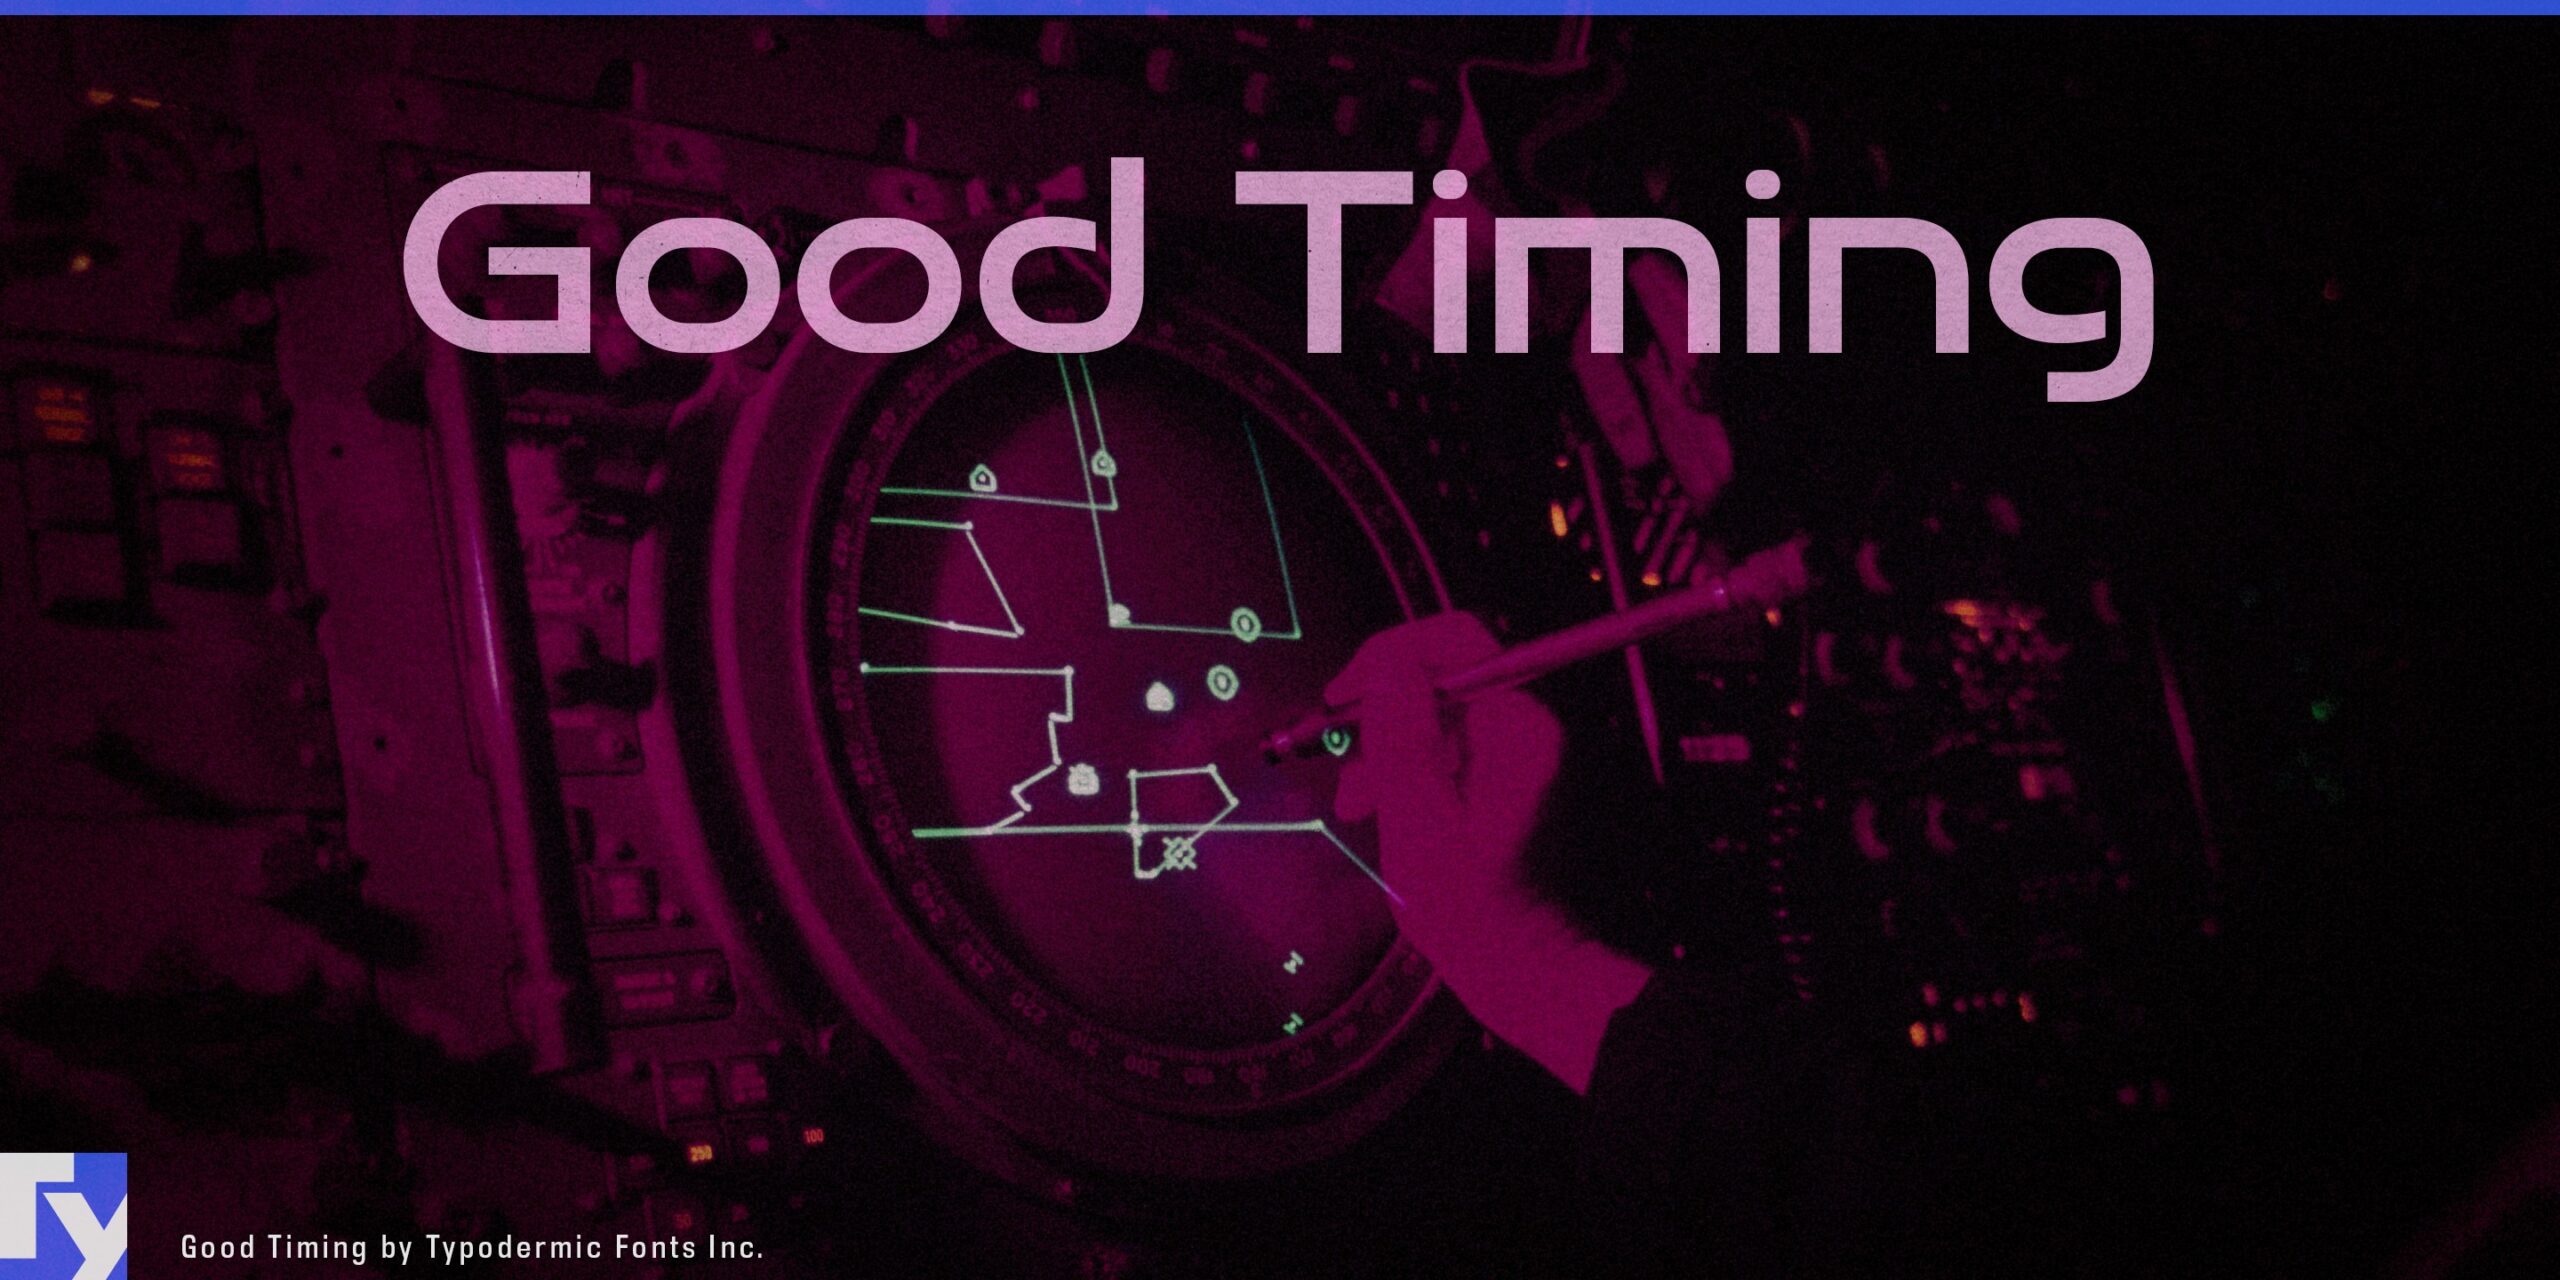 Eye-Catching Designs: Good Timing Typeface Commands Attention